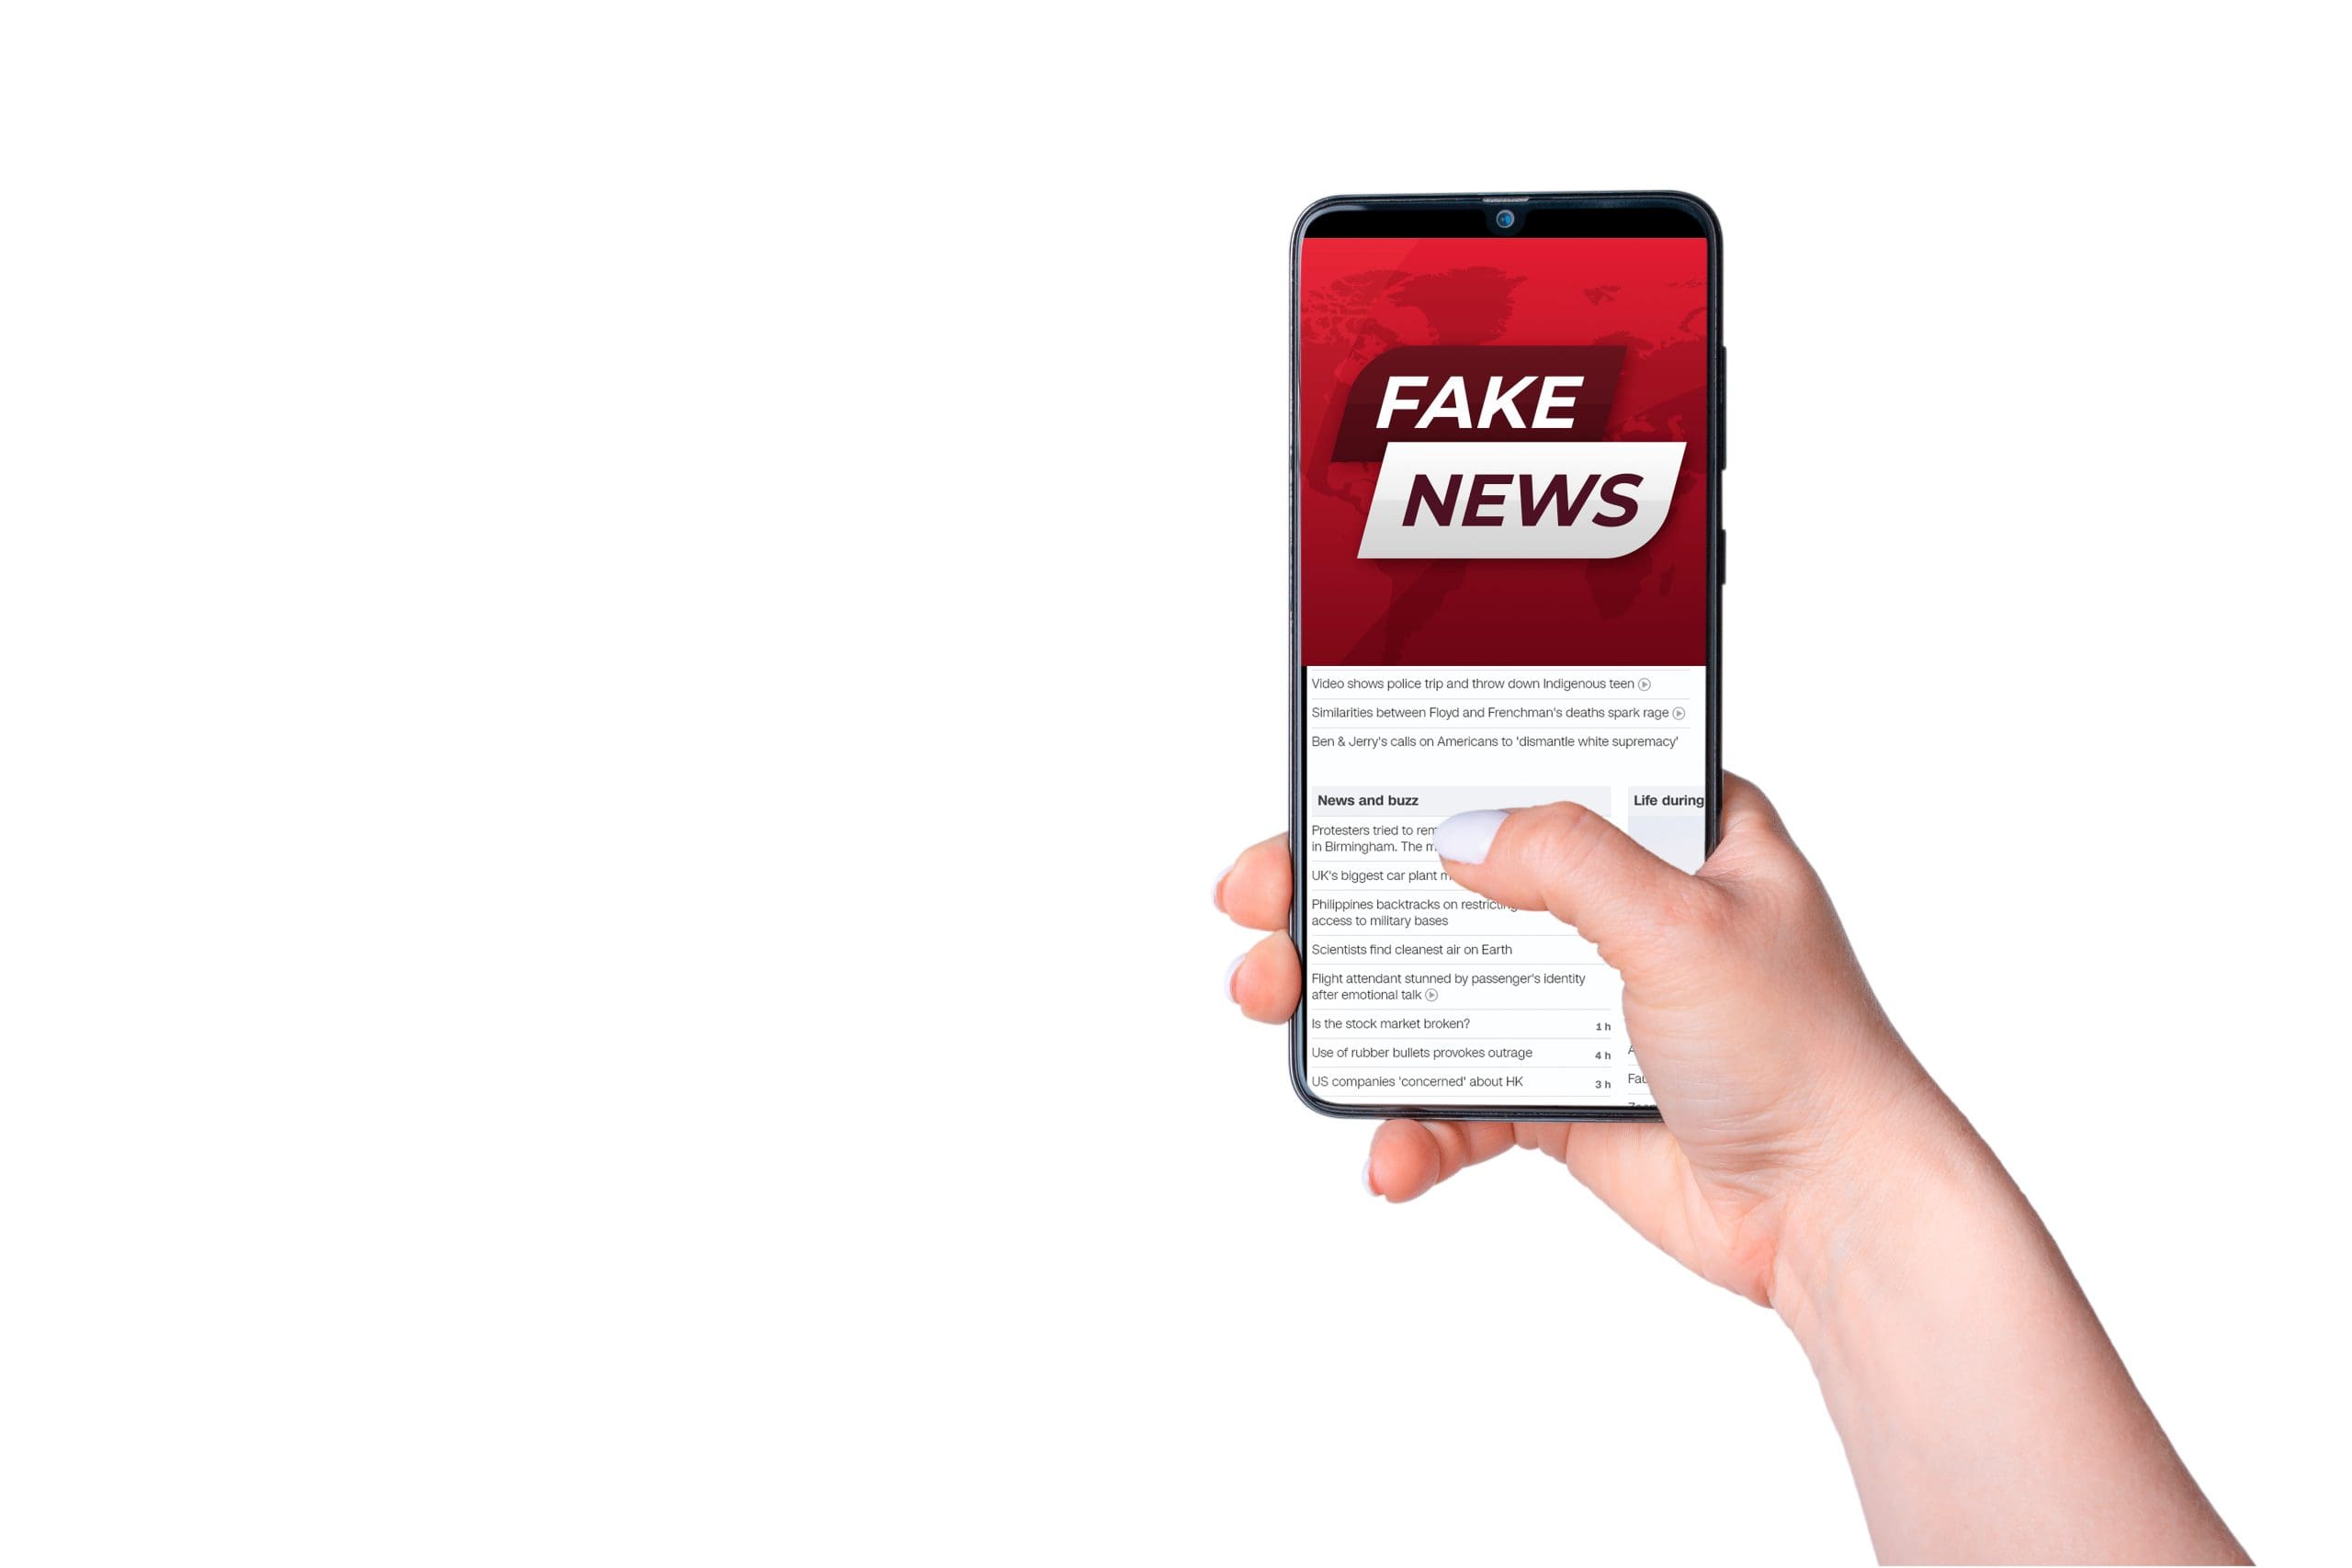 A hand holding a smartphone with the fake news app on it.